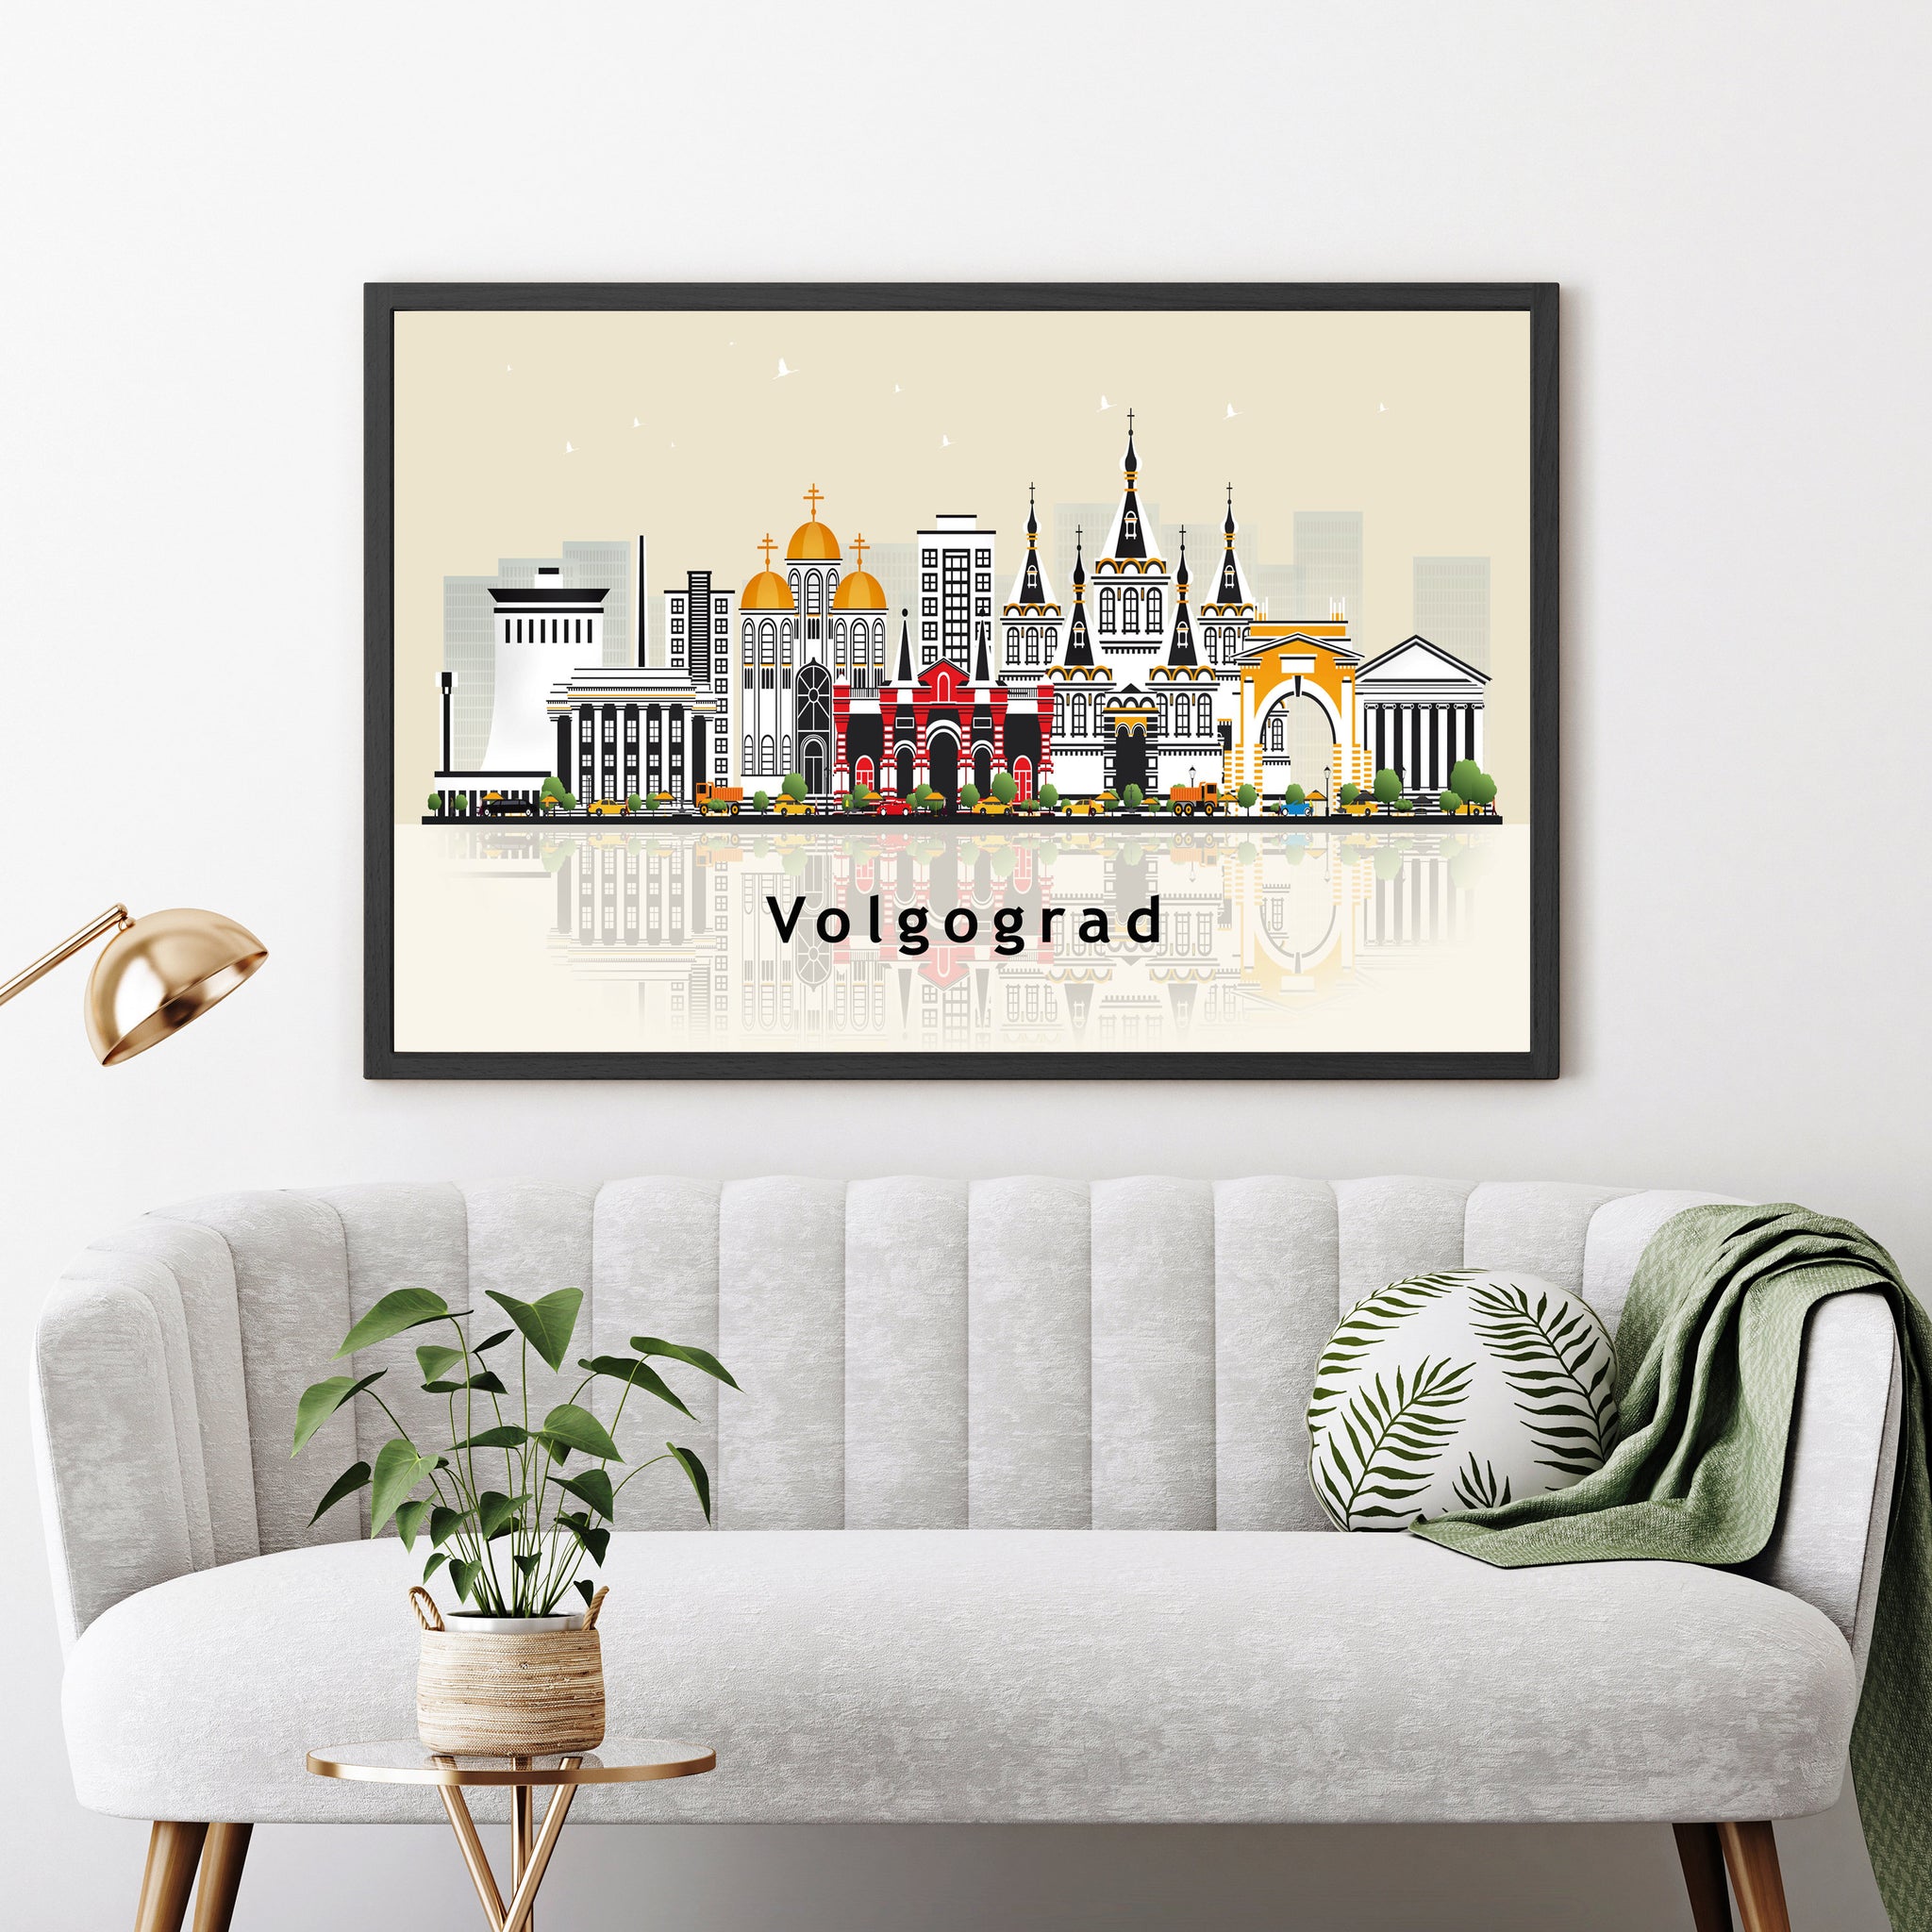 VOLGOGRAD RUSSIA Illustration skyline poster, Modern skyline cityscape poster print, VOLGOGRAD landmark map poster, Home wall decoration